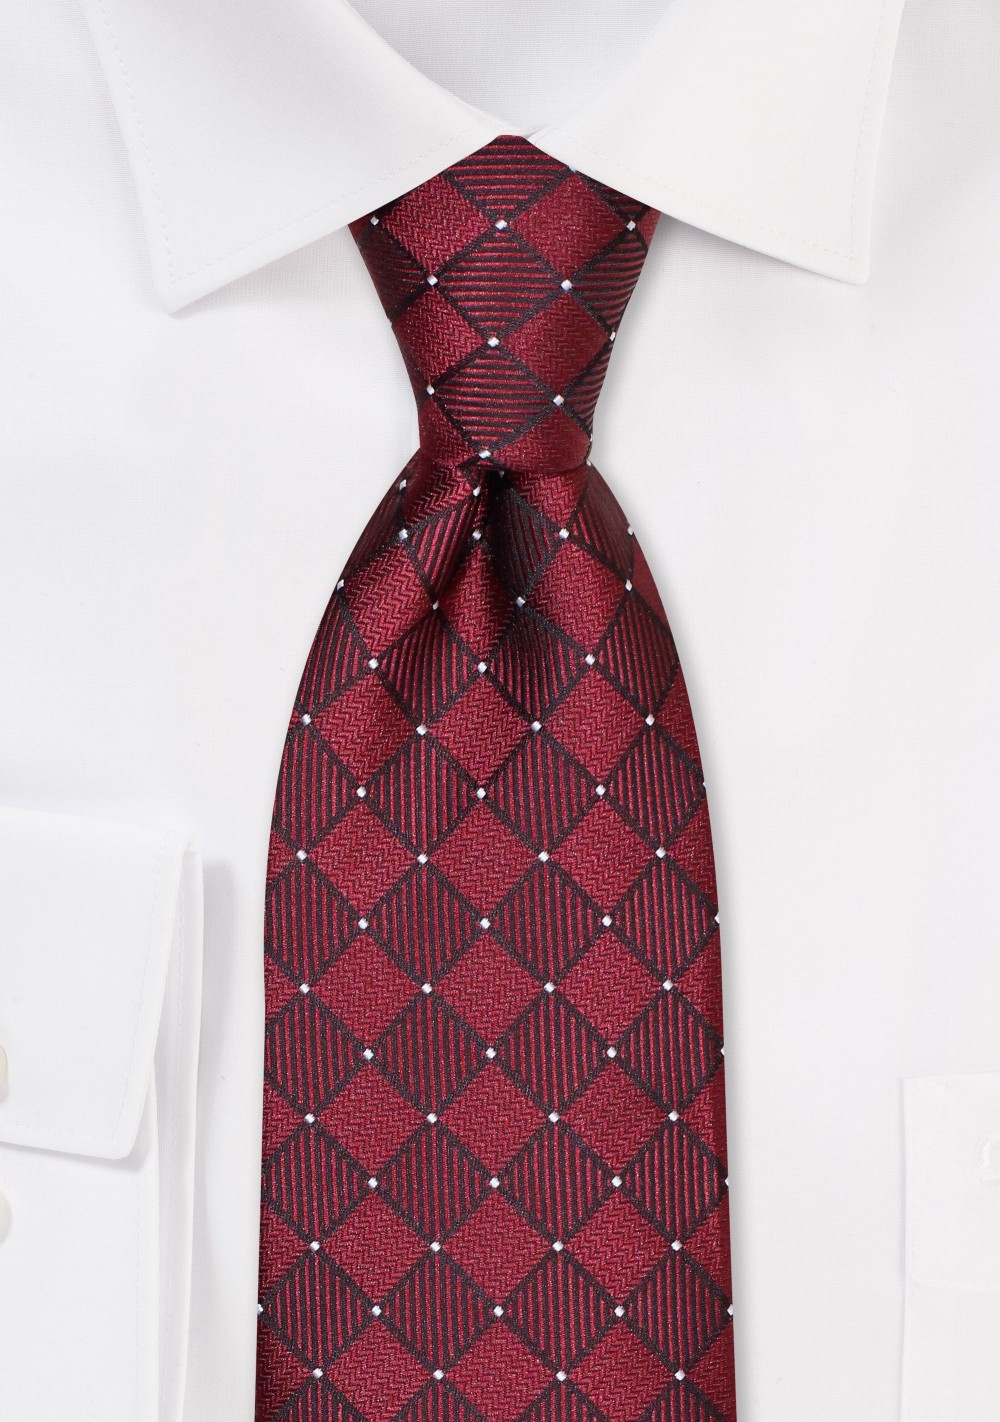 Cabernet Red Tie with Woven Check Design